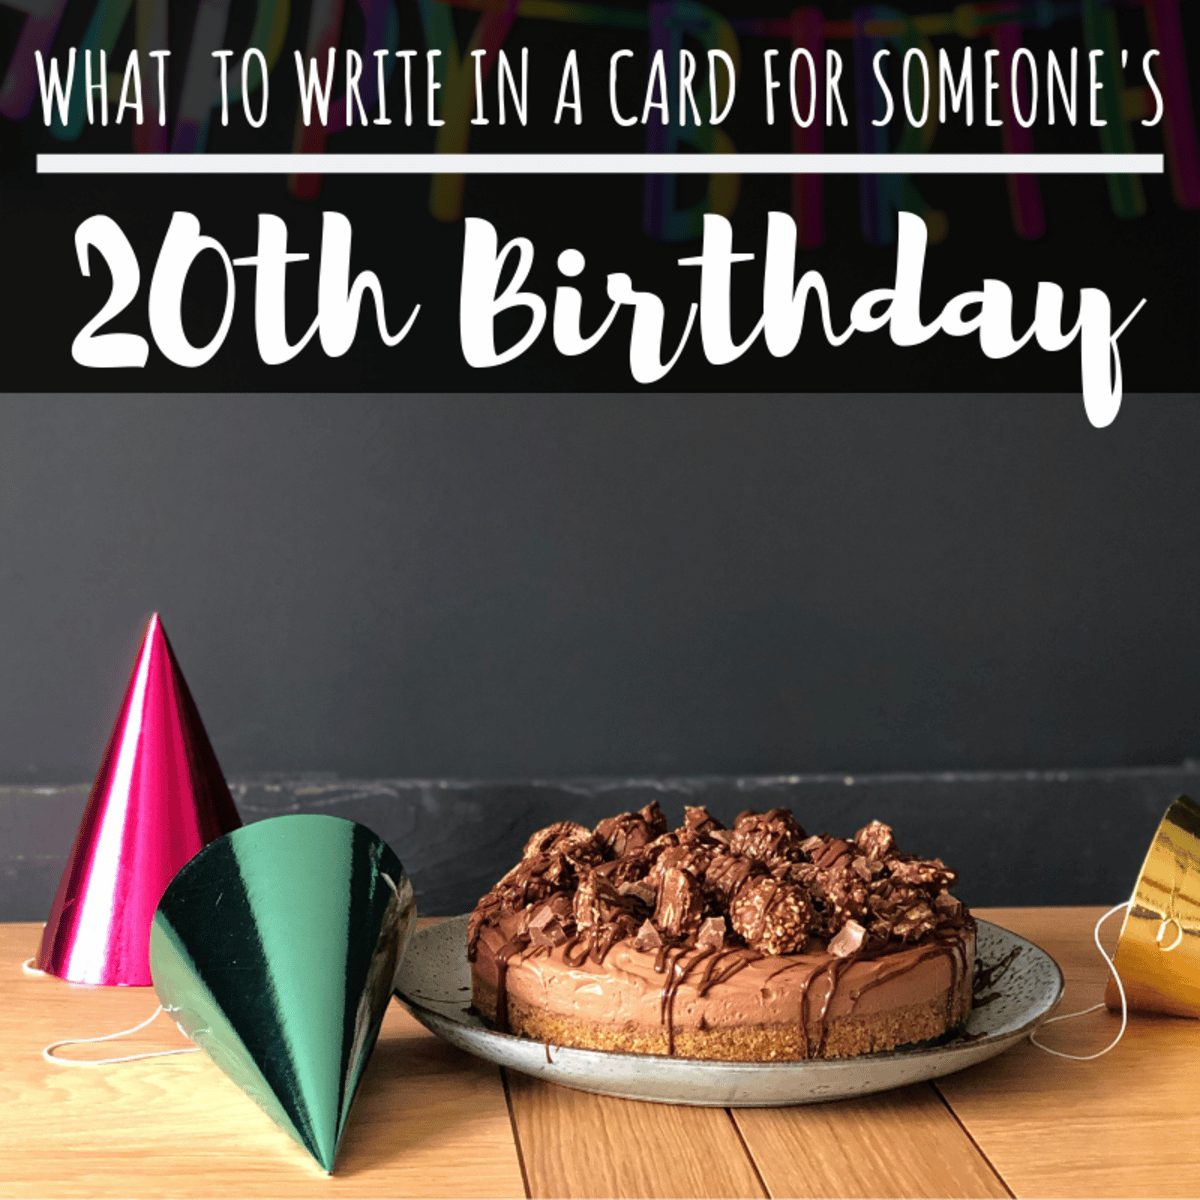 20th Birthday Wishes to Write in a Card